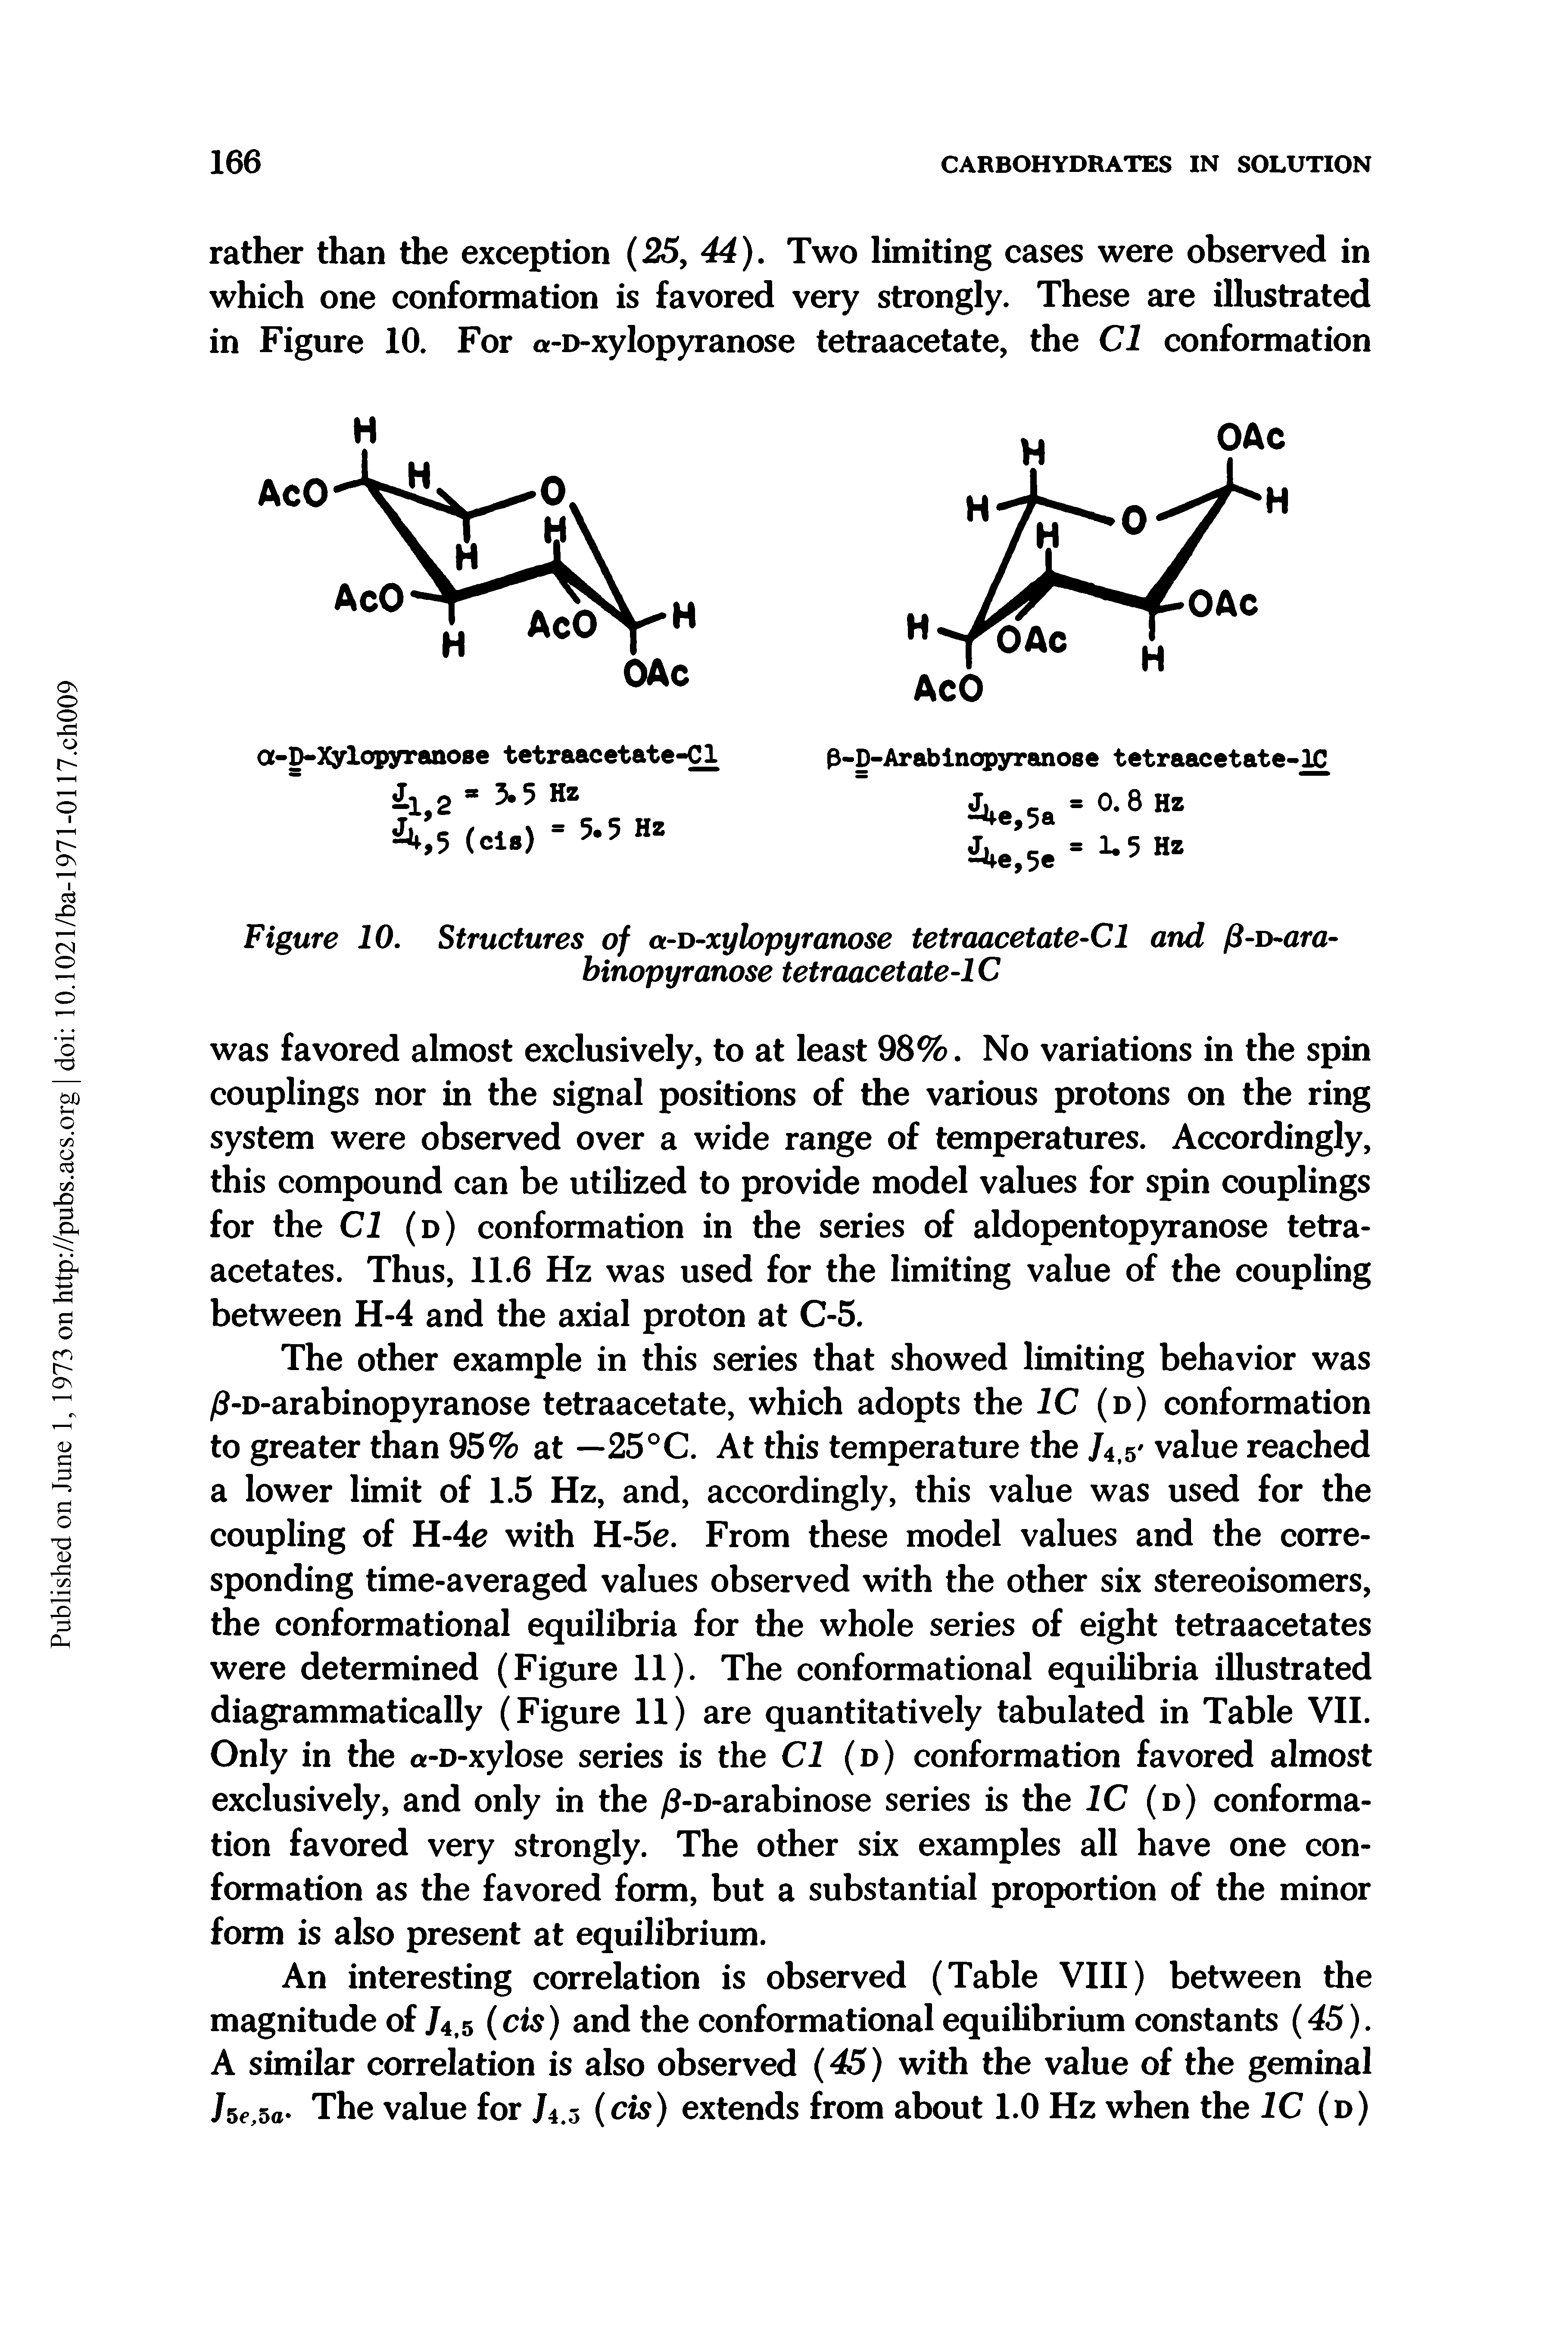 Figure 10. Structures of a-D-xylopyranose tetraacetate-Cl and ft-D-ara-binopyranose tetraacetate-lC...